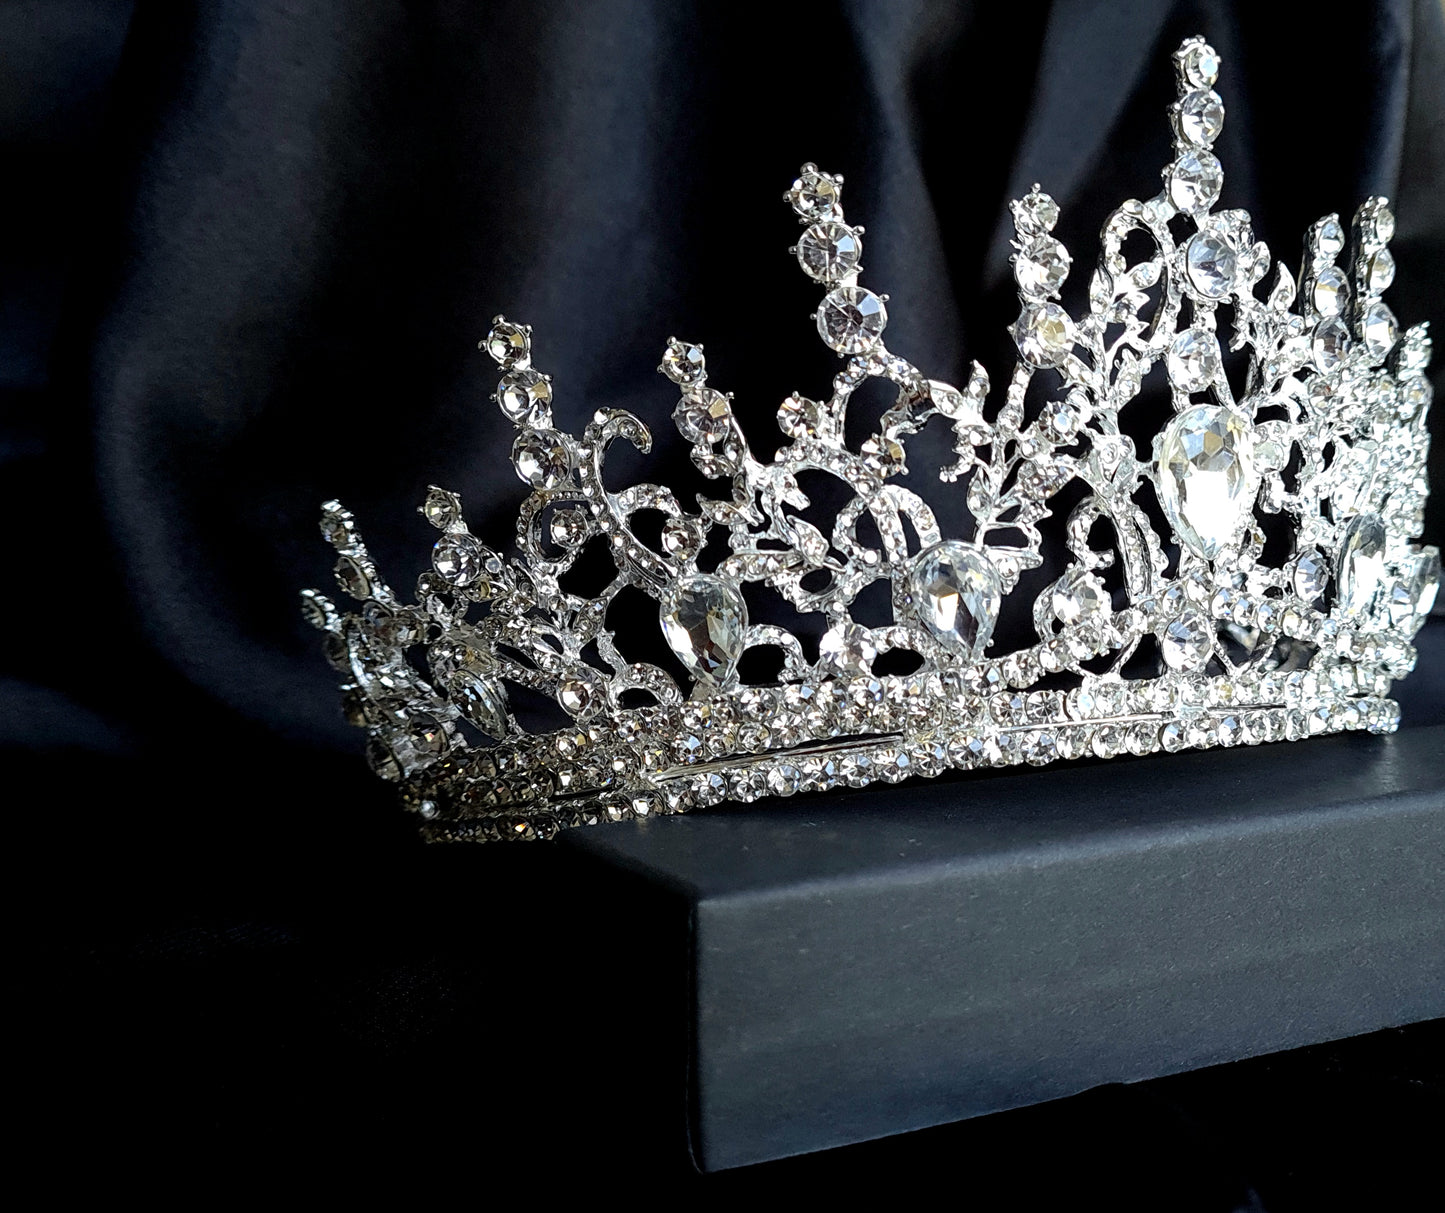  A close-up of a tiara with rhinestones on a black background. The tiara is made of silver and features a delicate design with cascading rhinestones. The rhinestones are clear and sparkling. 